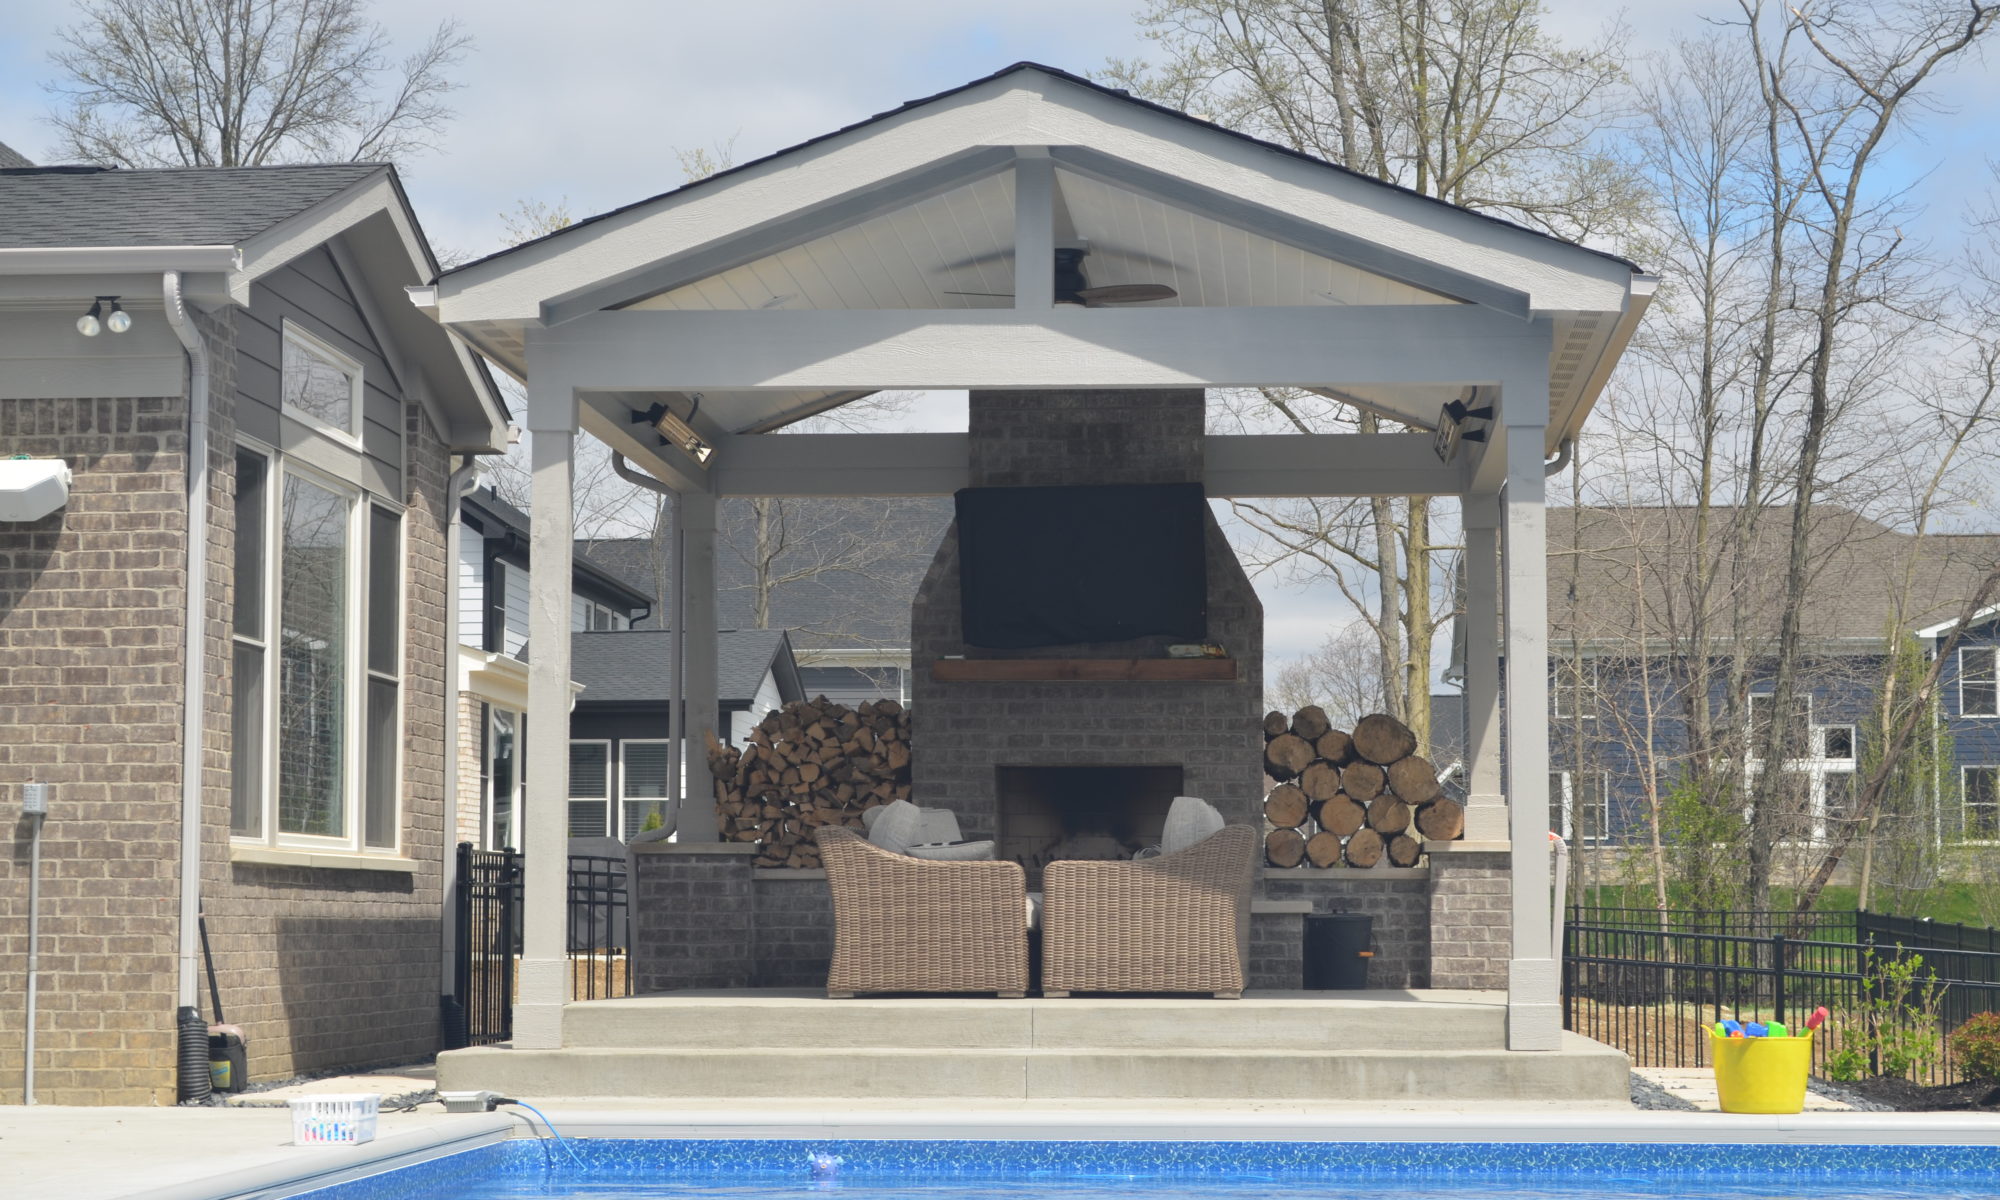 Precision Outdoors Fishers Indiana concrete patio gable sunroof structure fireplace pool custom landscaping walking stones outdoor space firewood television